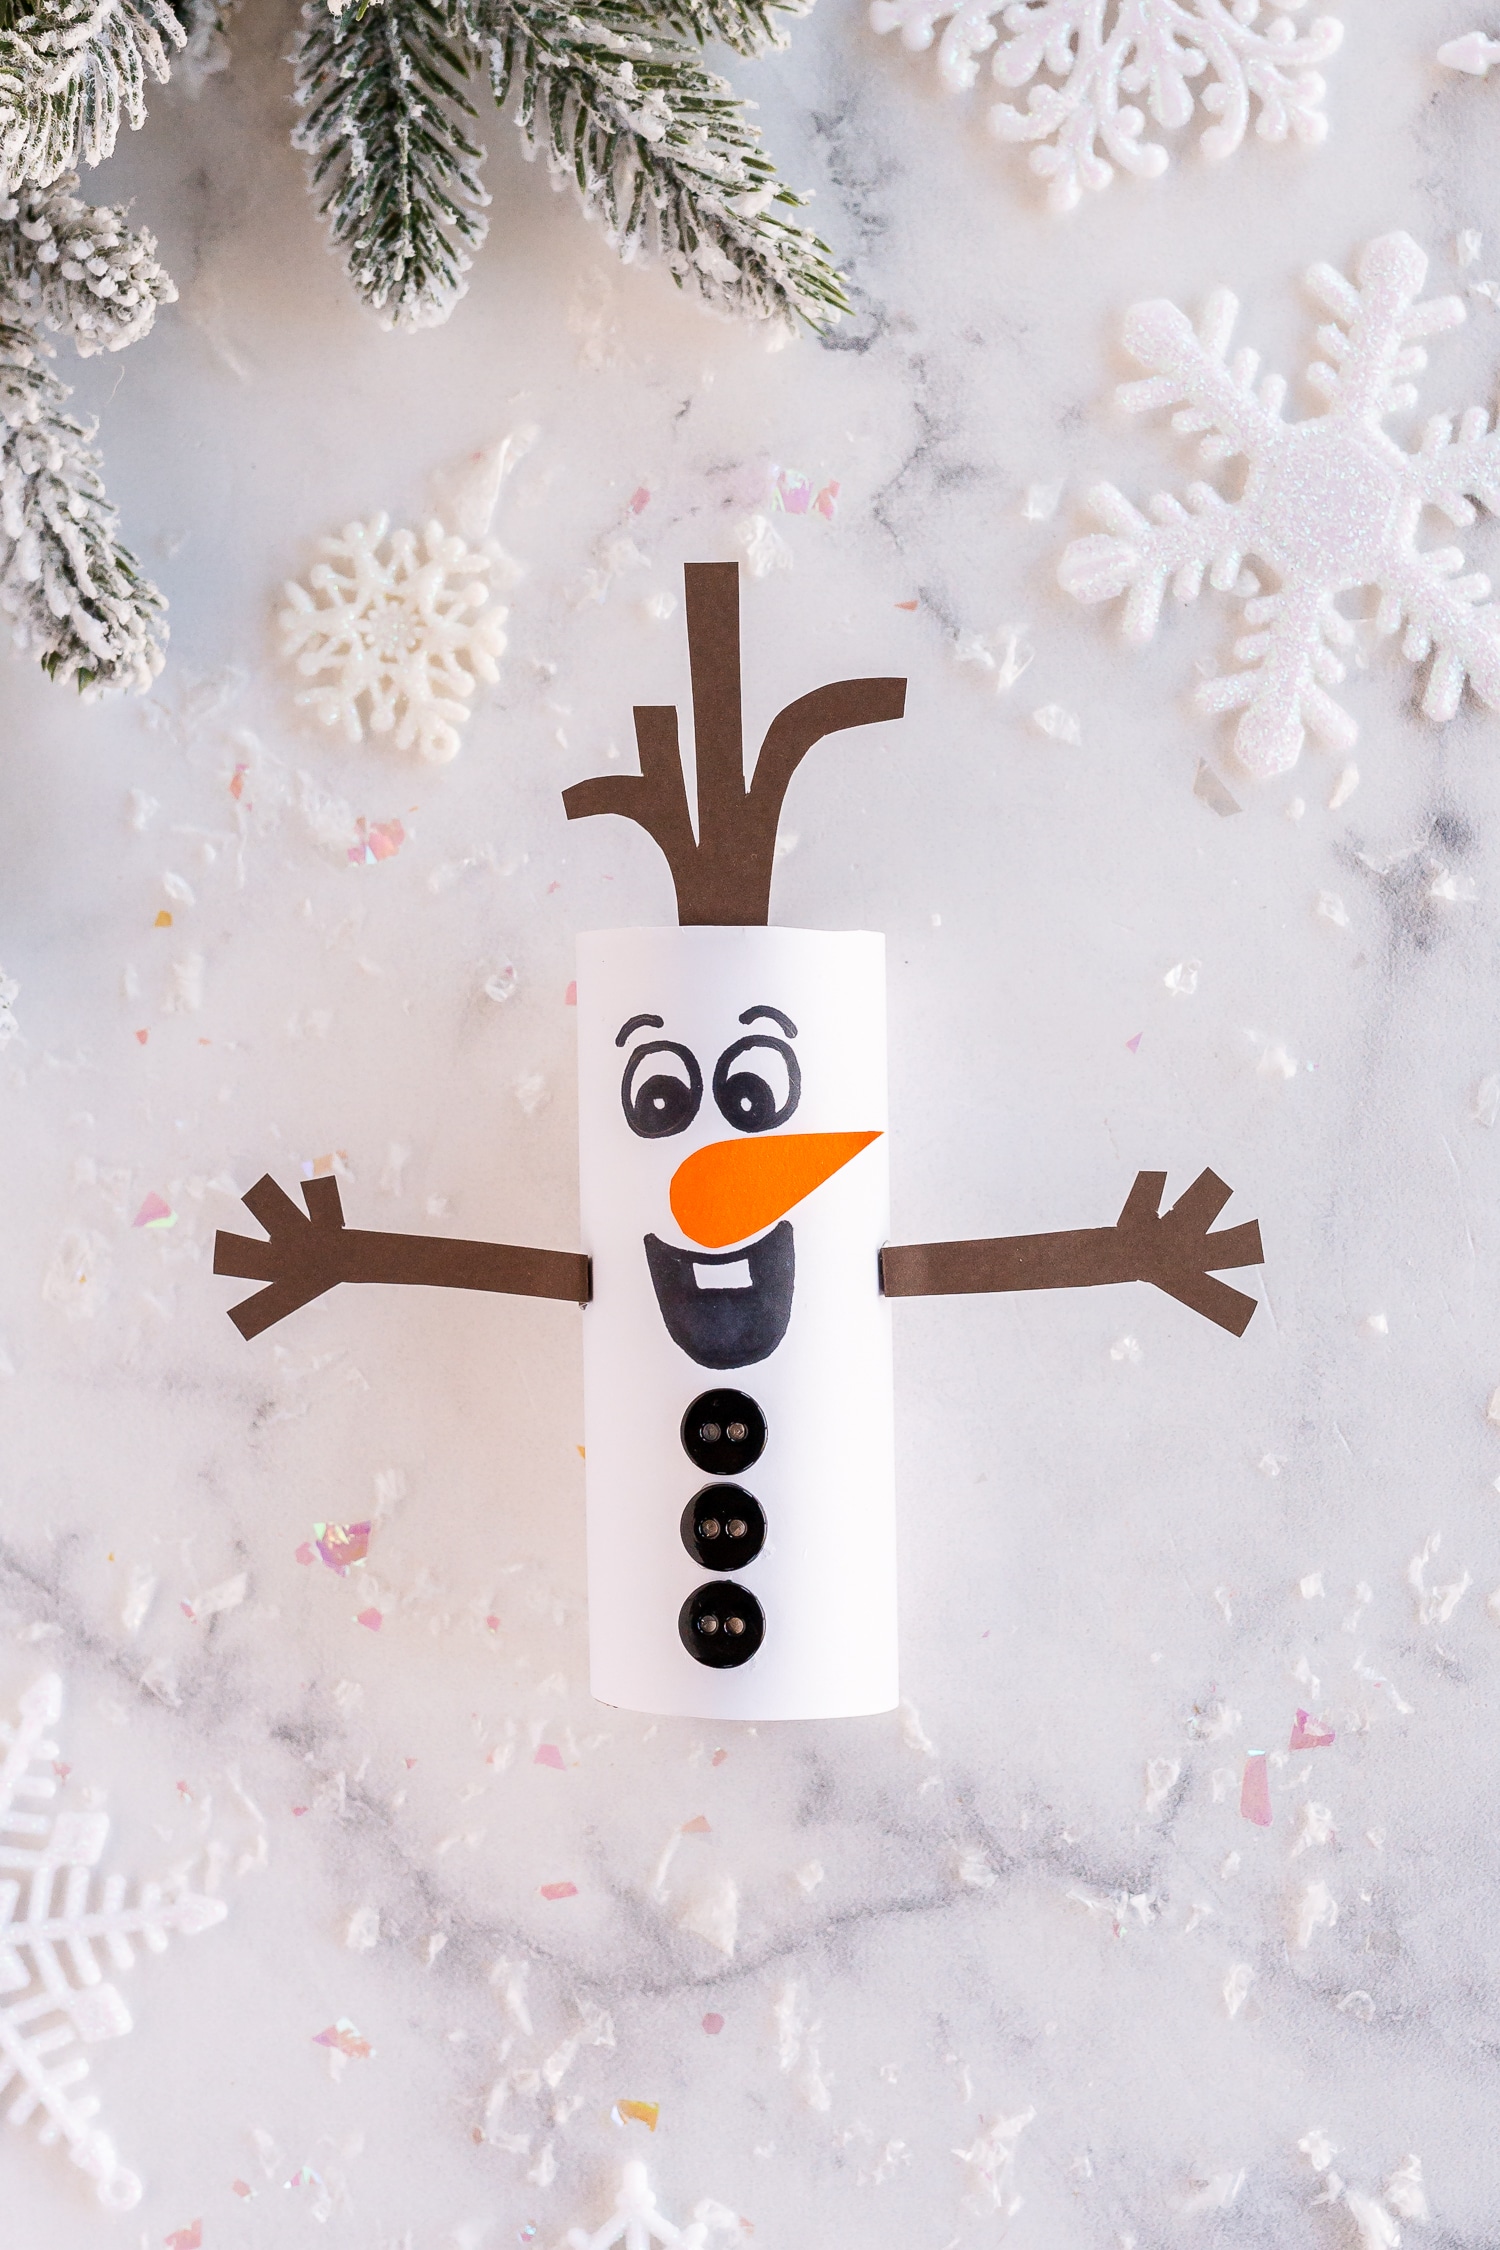 Enjoy a snow theme craft with this cute Toilet Paper Roll Olaf! It's so easy to make, and your kids will love the Frozen theme!